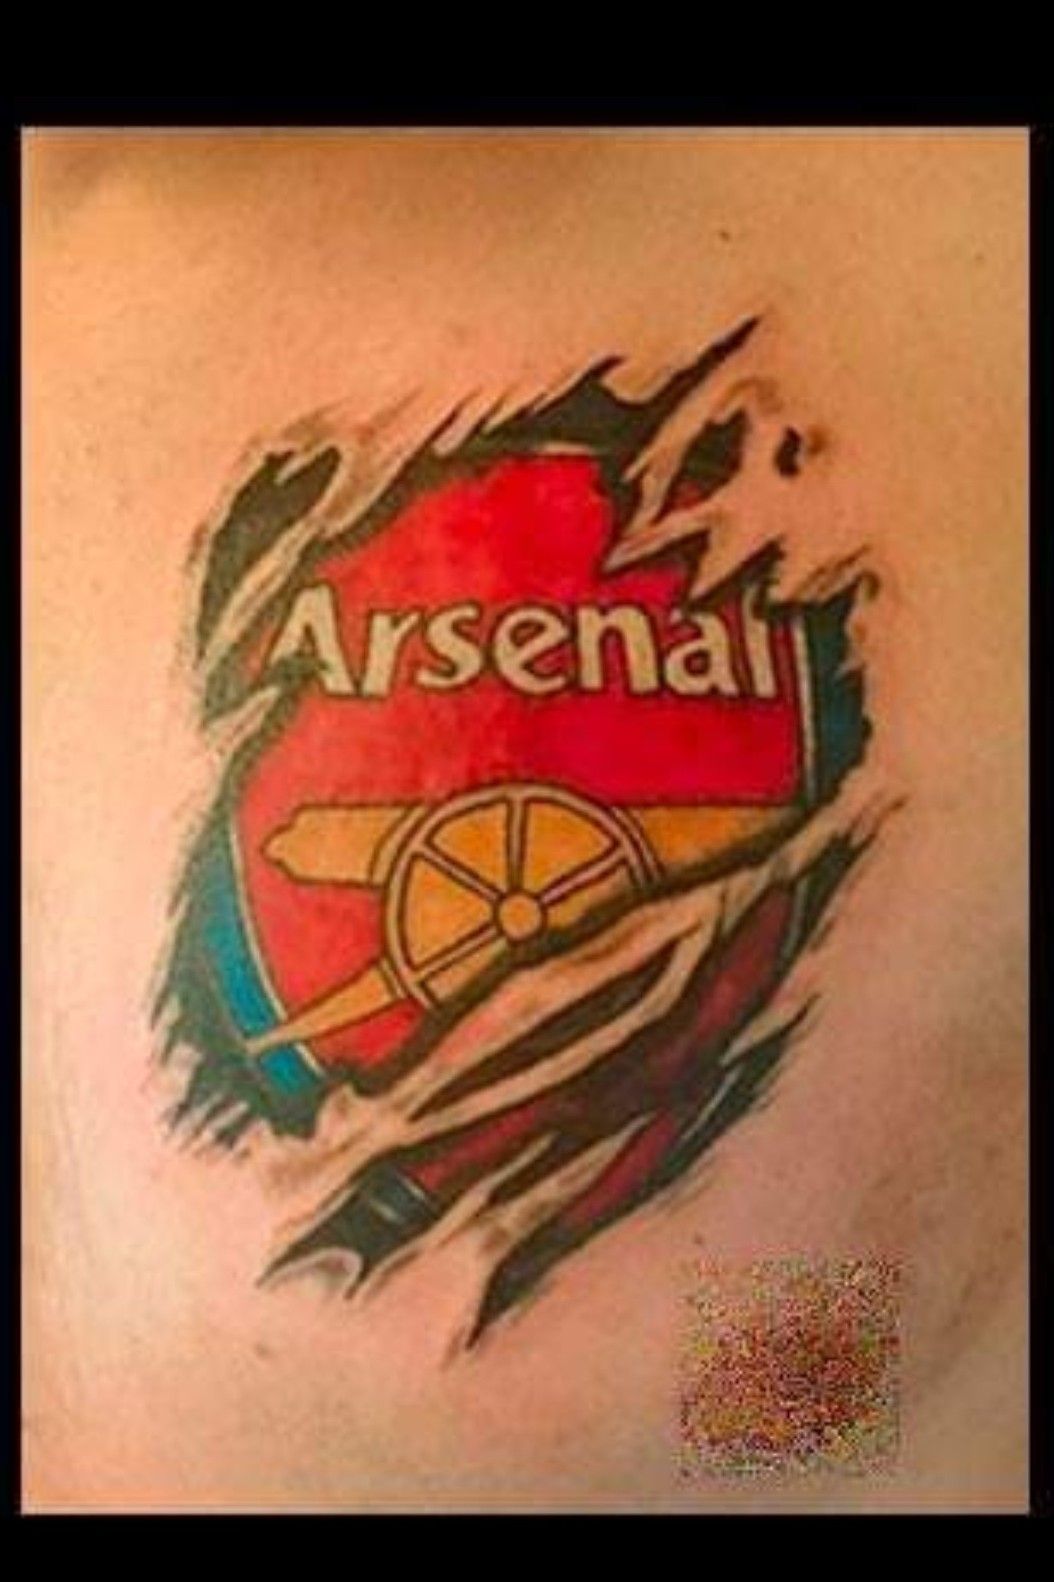 Aliens Tattoo - For all the Arsenal fans out there. Tattoo by Aneey  Suryavanshi | Facebook